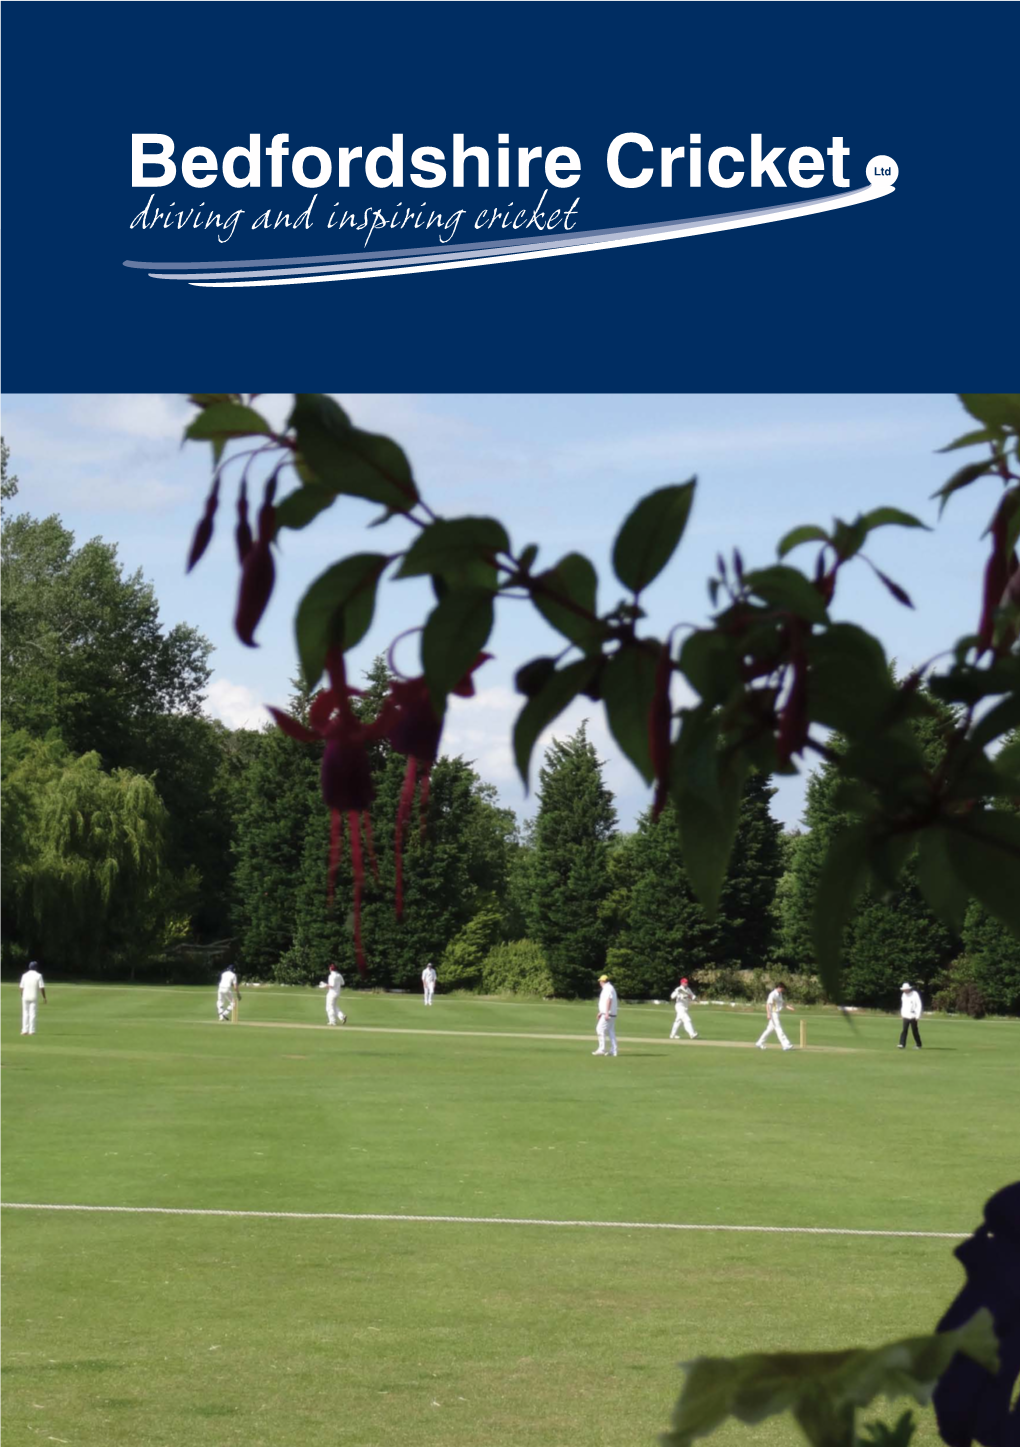 Bedfordshire Cricket Ltd Driving and Inspiring Cricket Our Vision to Drive and Inspire Cricket